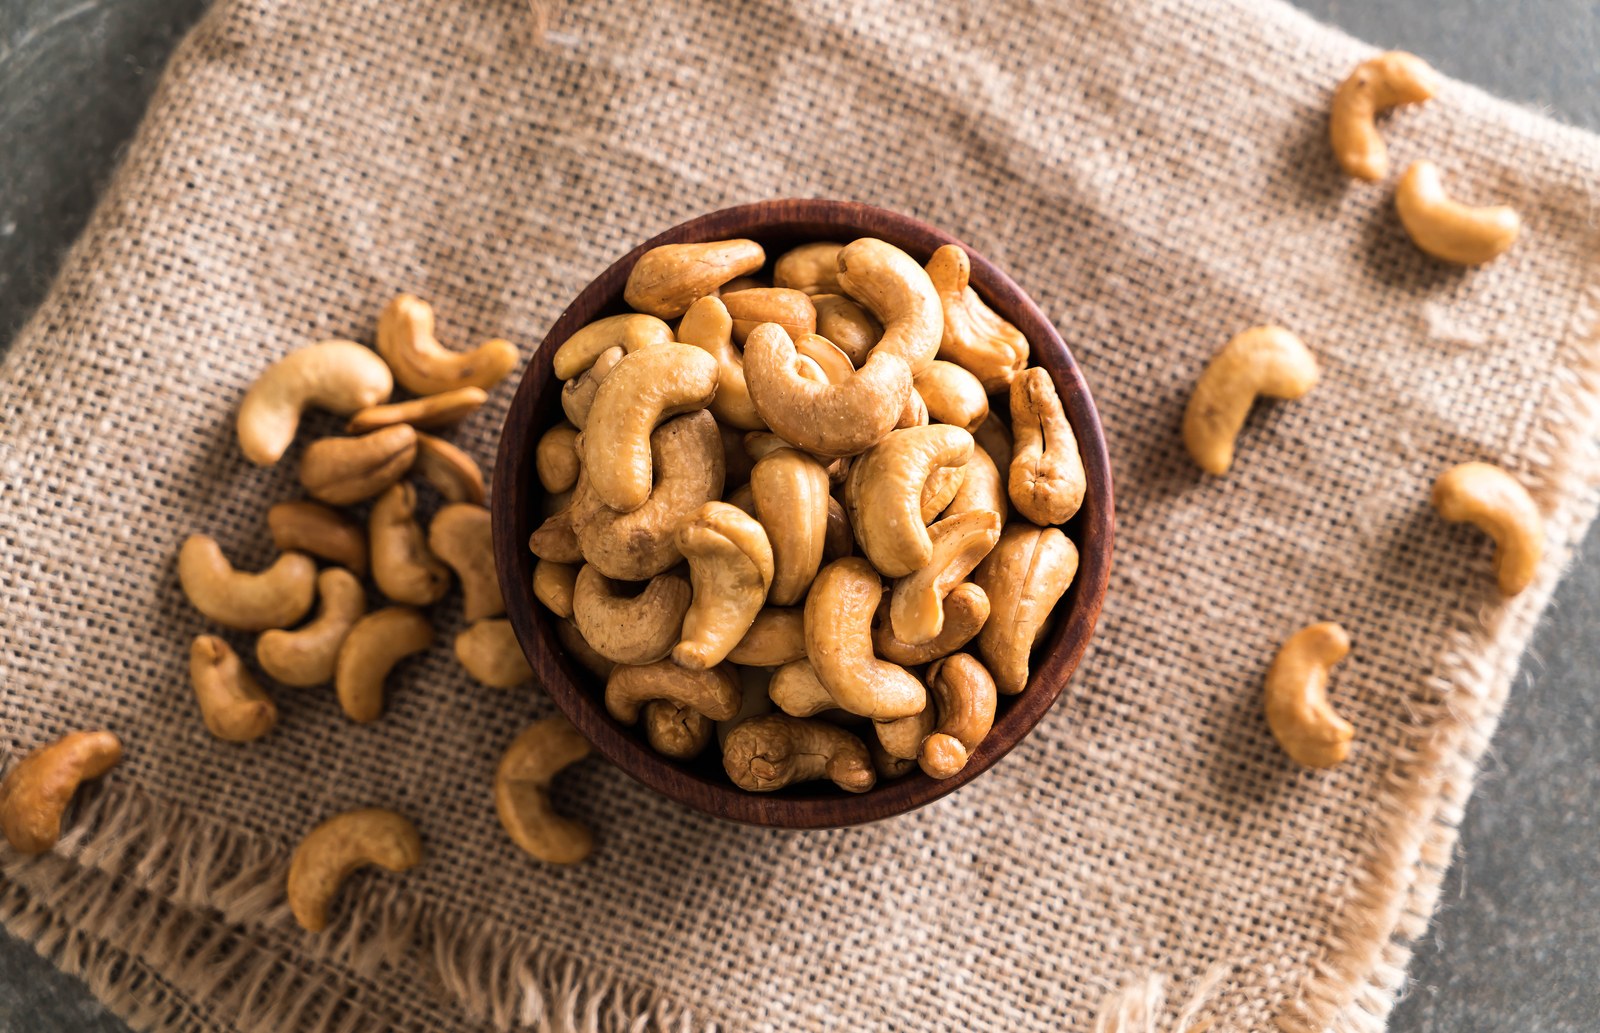 🥜 If You’ve Eaten 12/18 of These, You’re Nuts About Nuts Cashew Nuts